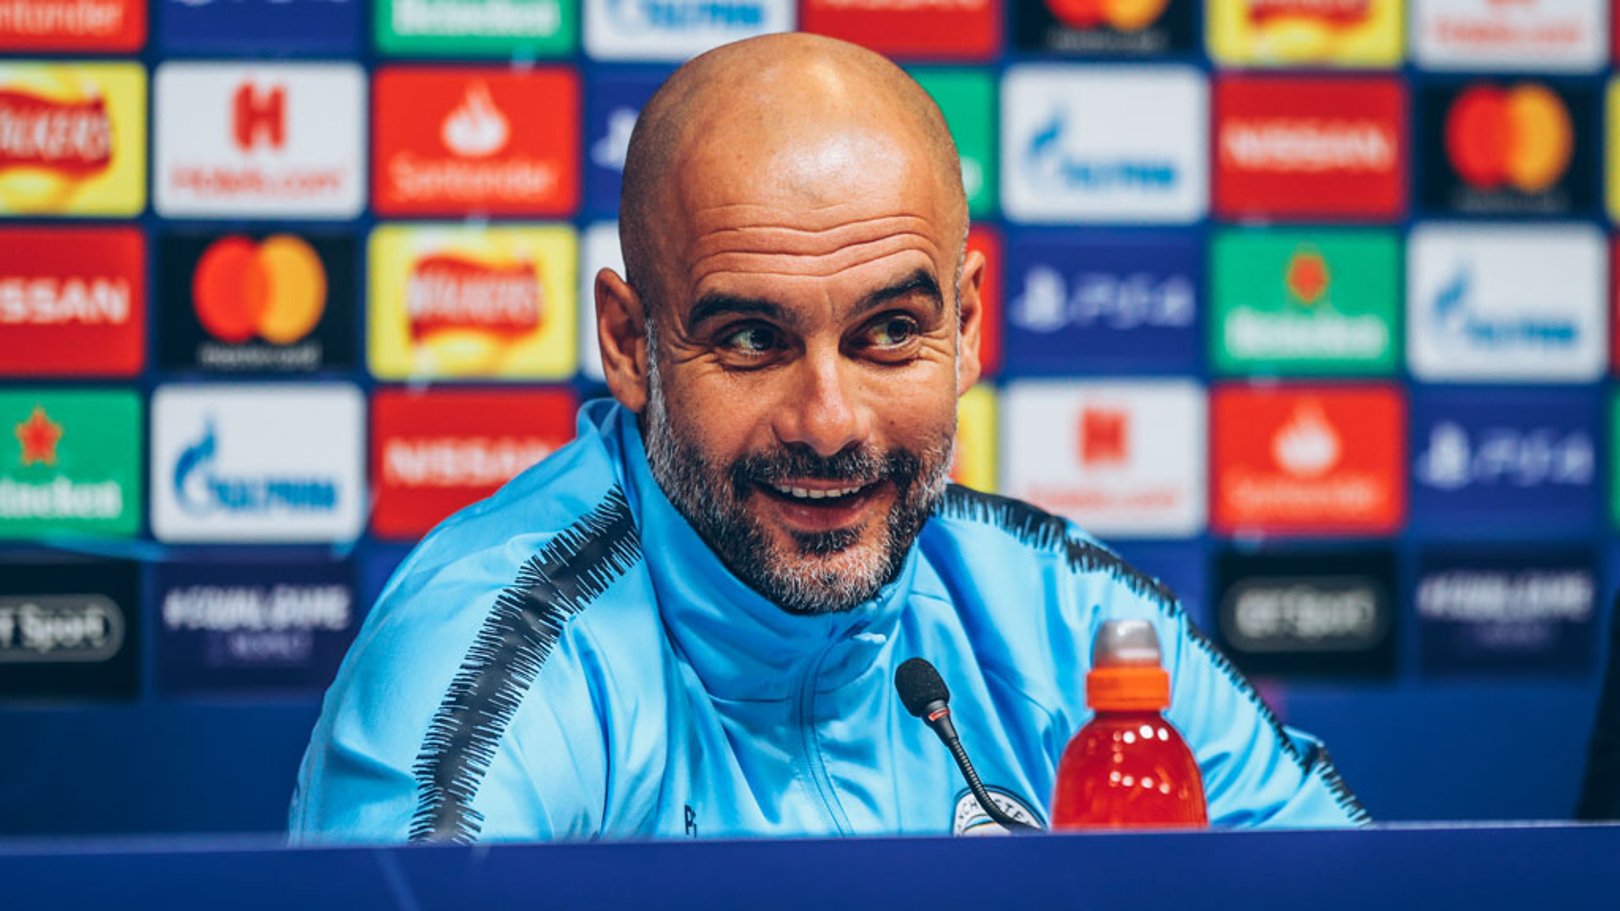 PEP TALK: The manager has addressed the media ahead of Tuesday's Champions League clash 